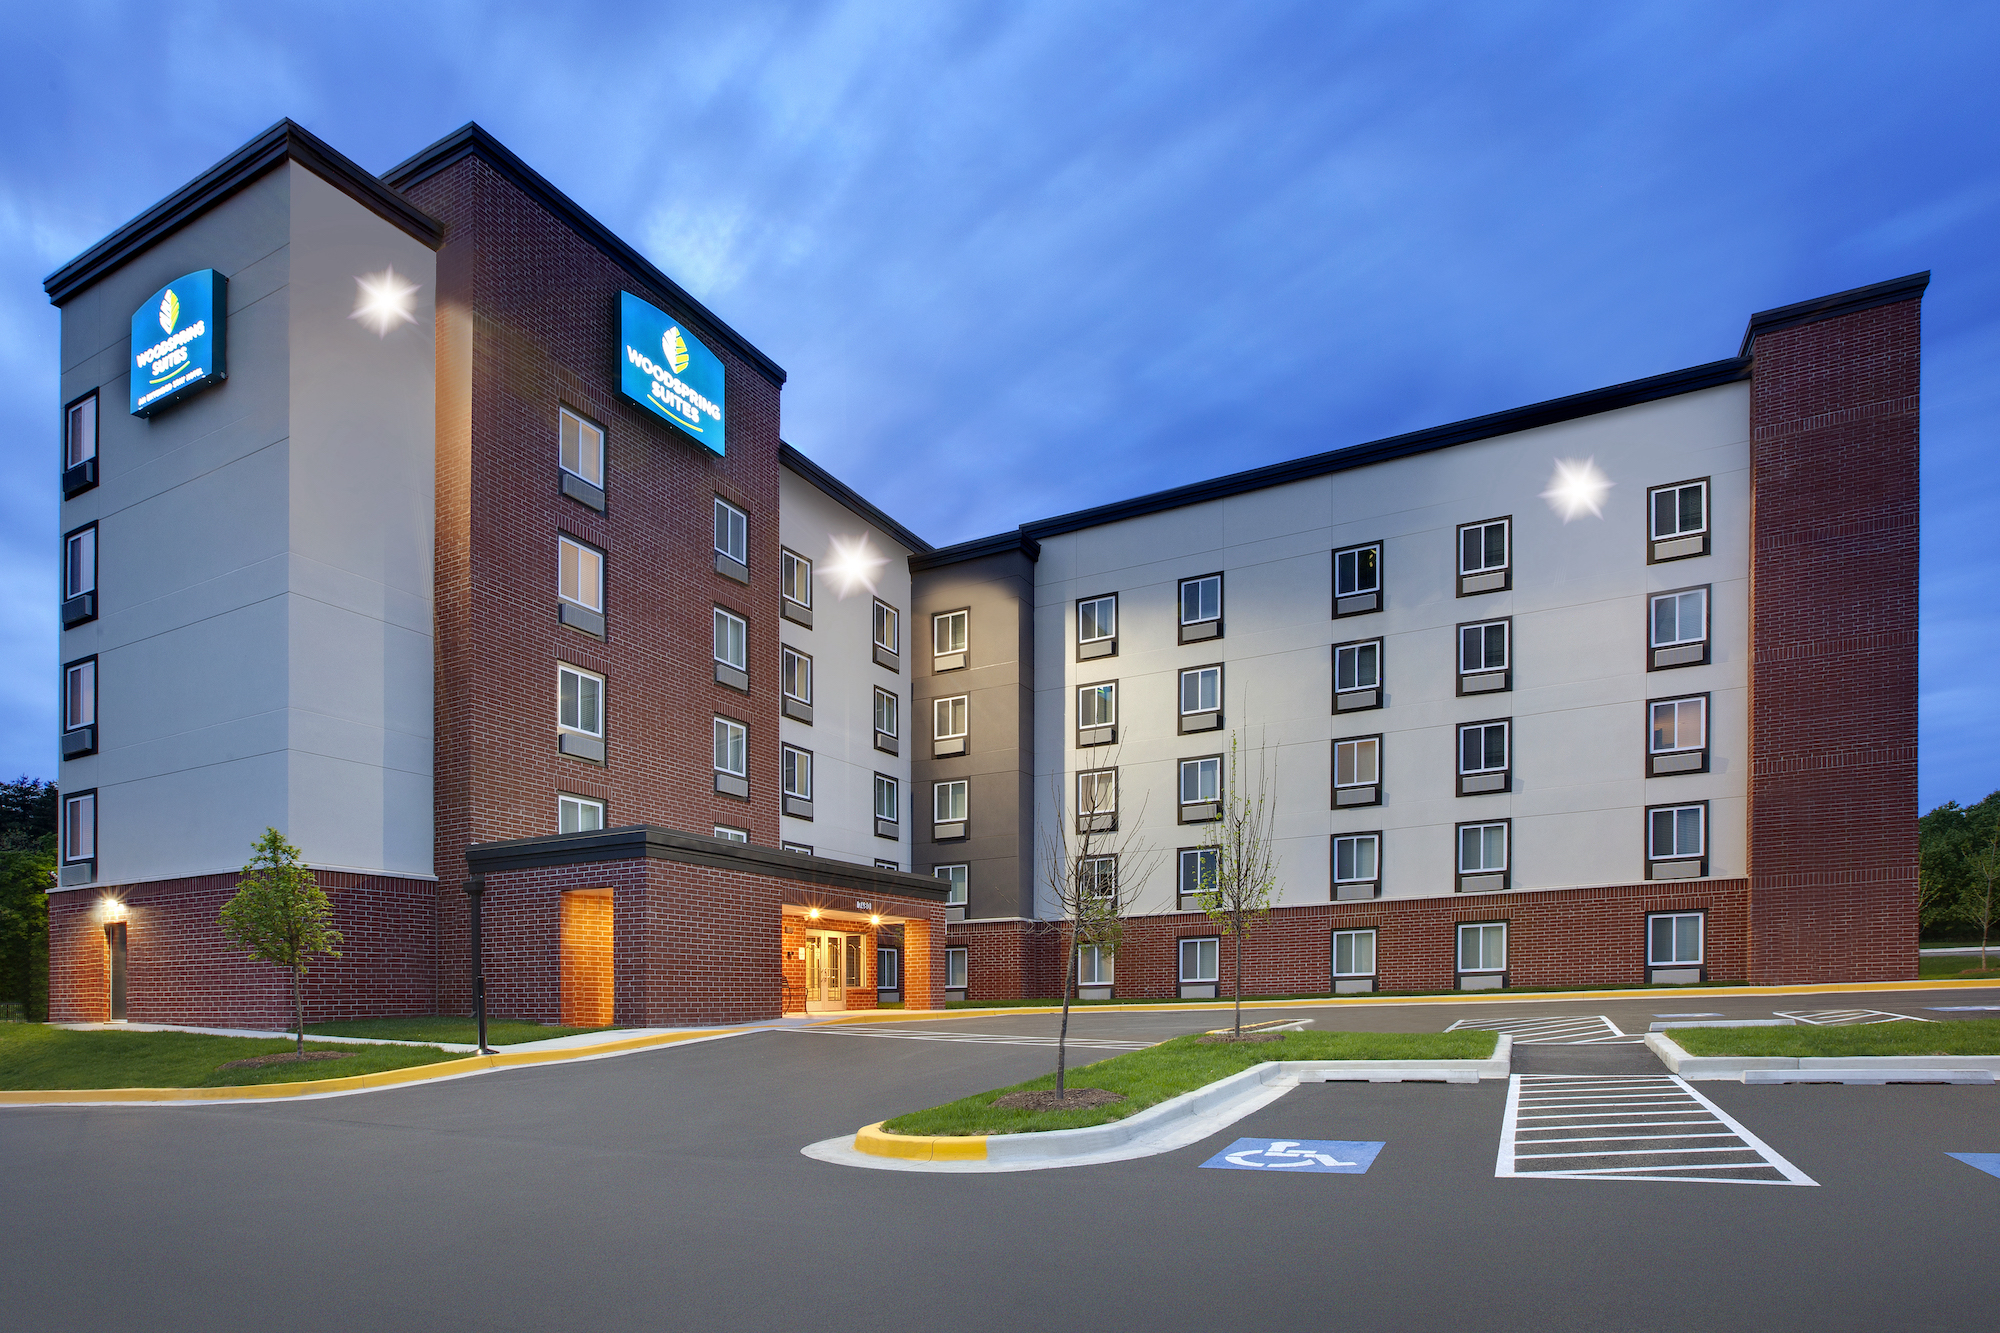 Sandpiper Lodging Trust has acquired five hotels under the WoodSpring Suites brand, including this property in Greenbelt, Maryland.